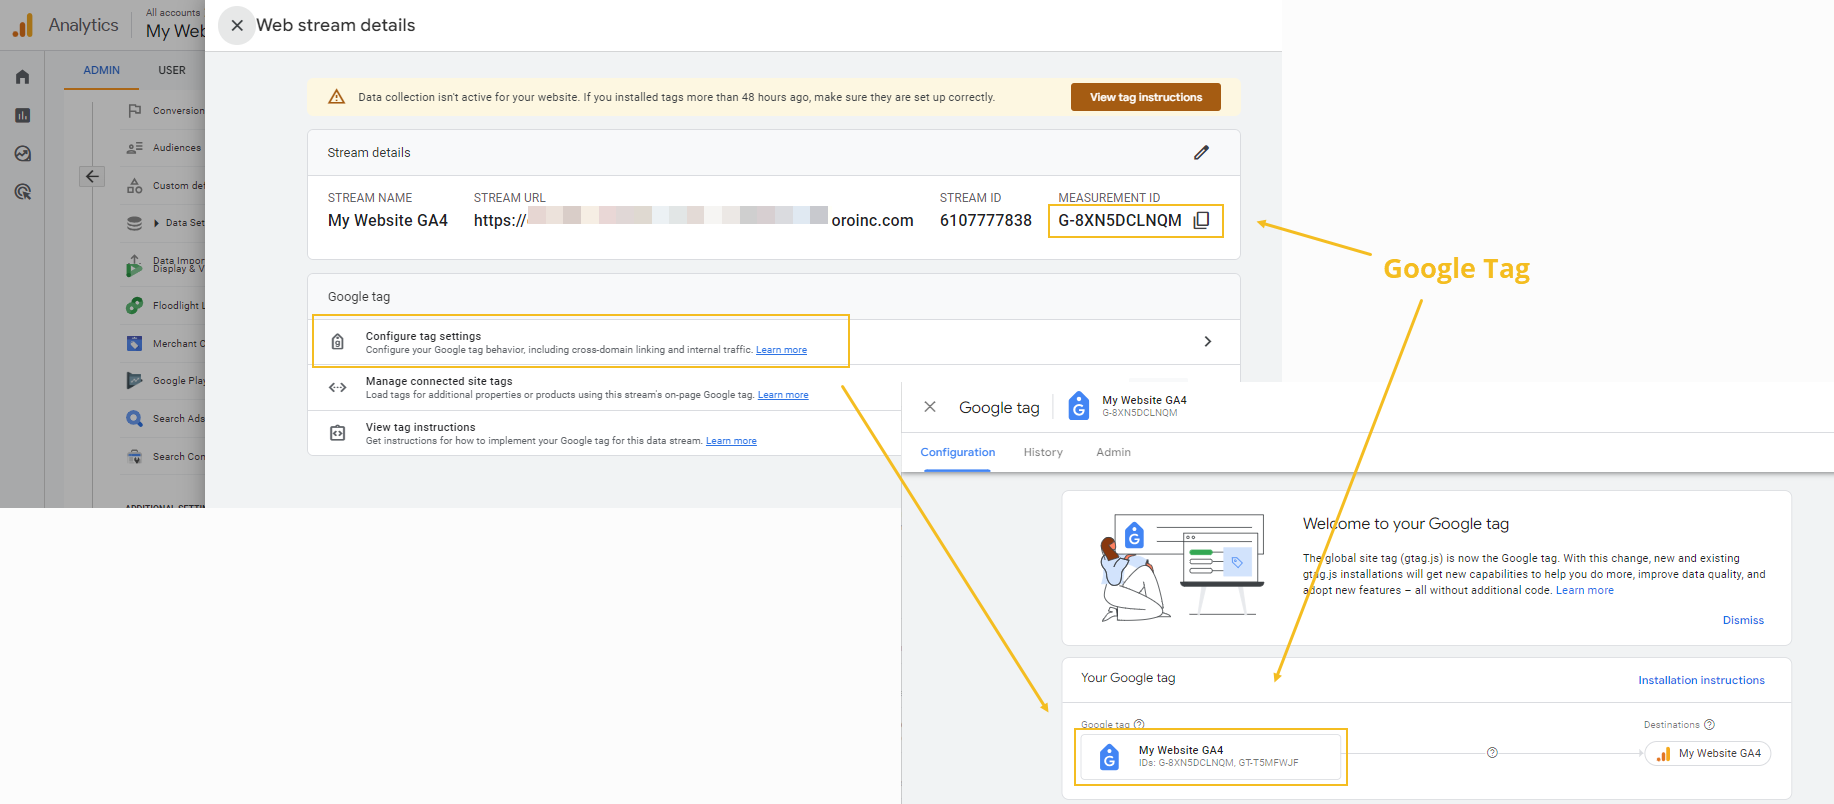 Highlighting the data stream's measurement ID and a google tag